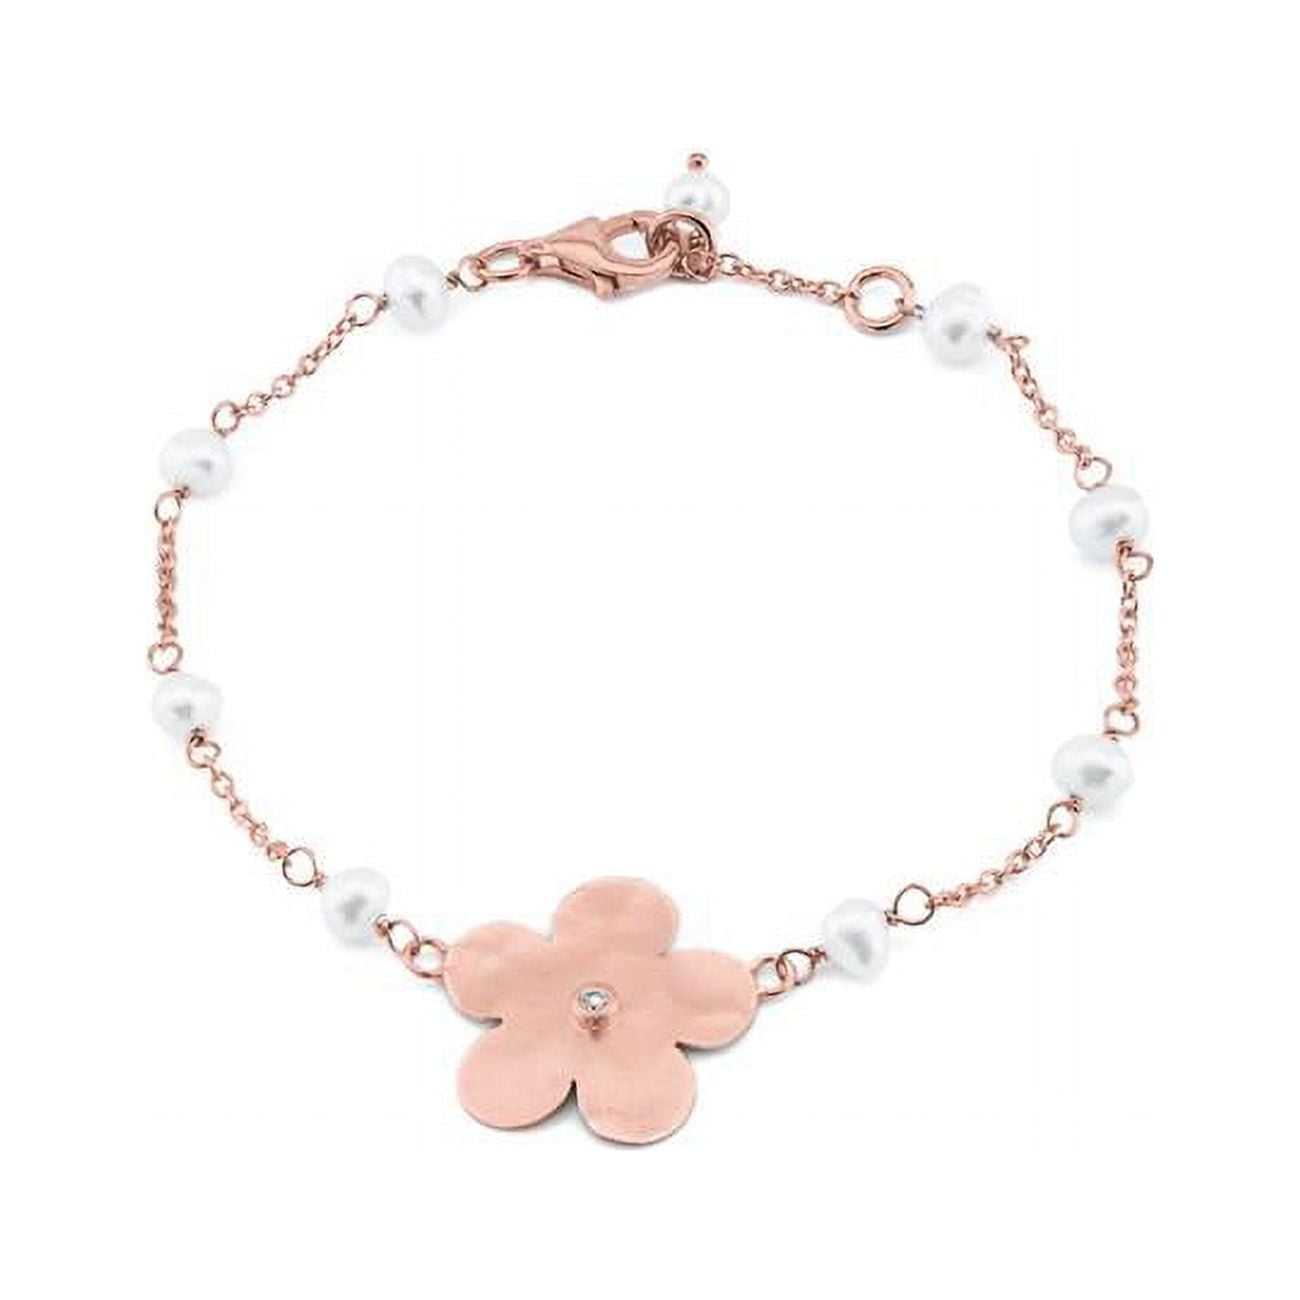 2b2216r 6.5 In. Hammered Rose Gold Plated Sterling Silver Flower Of Life & Pearls Chain Bracelet